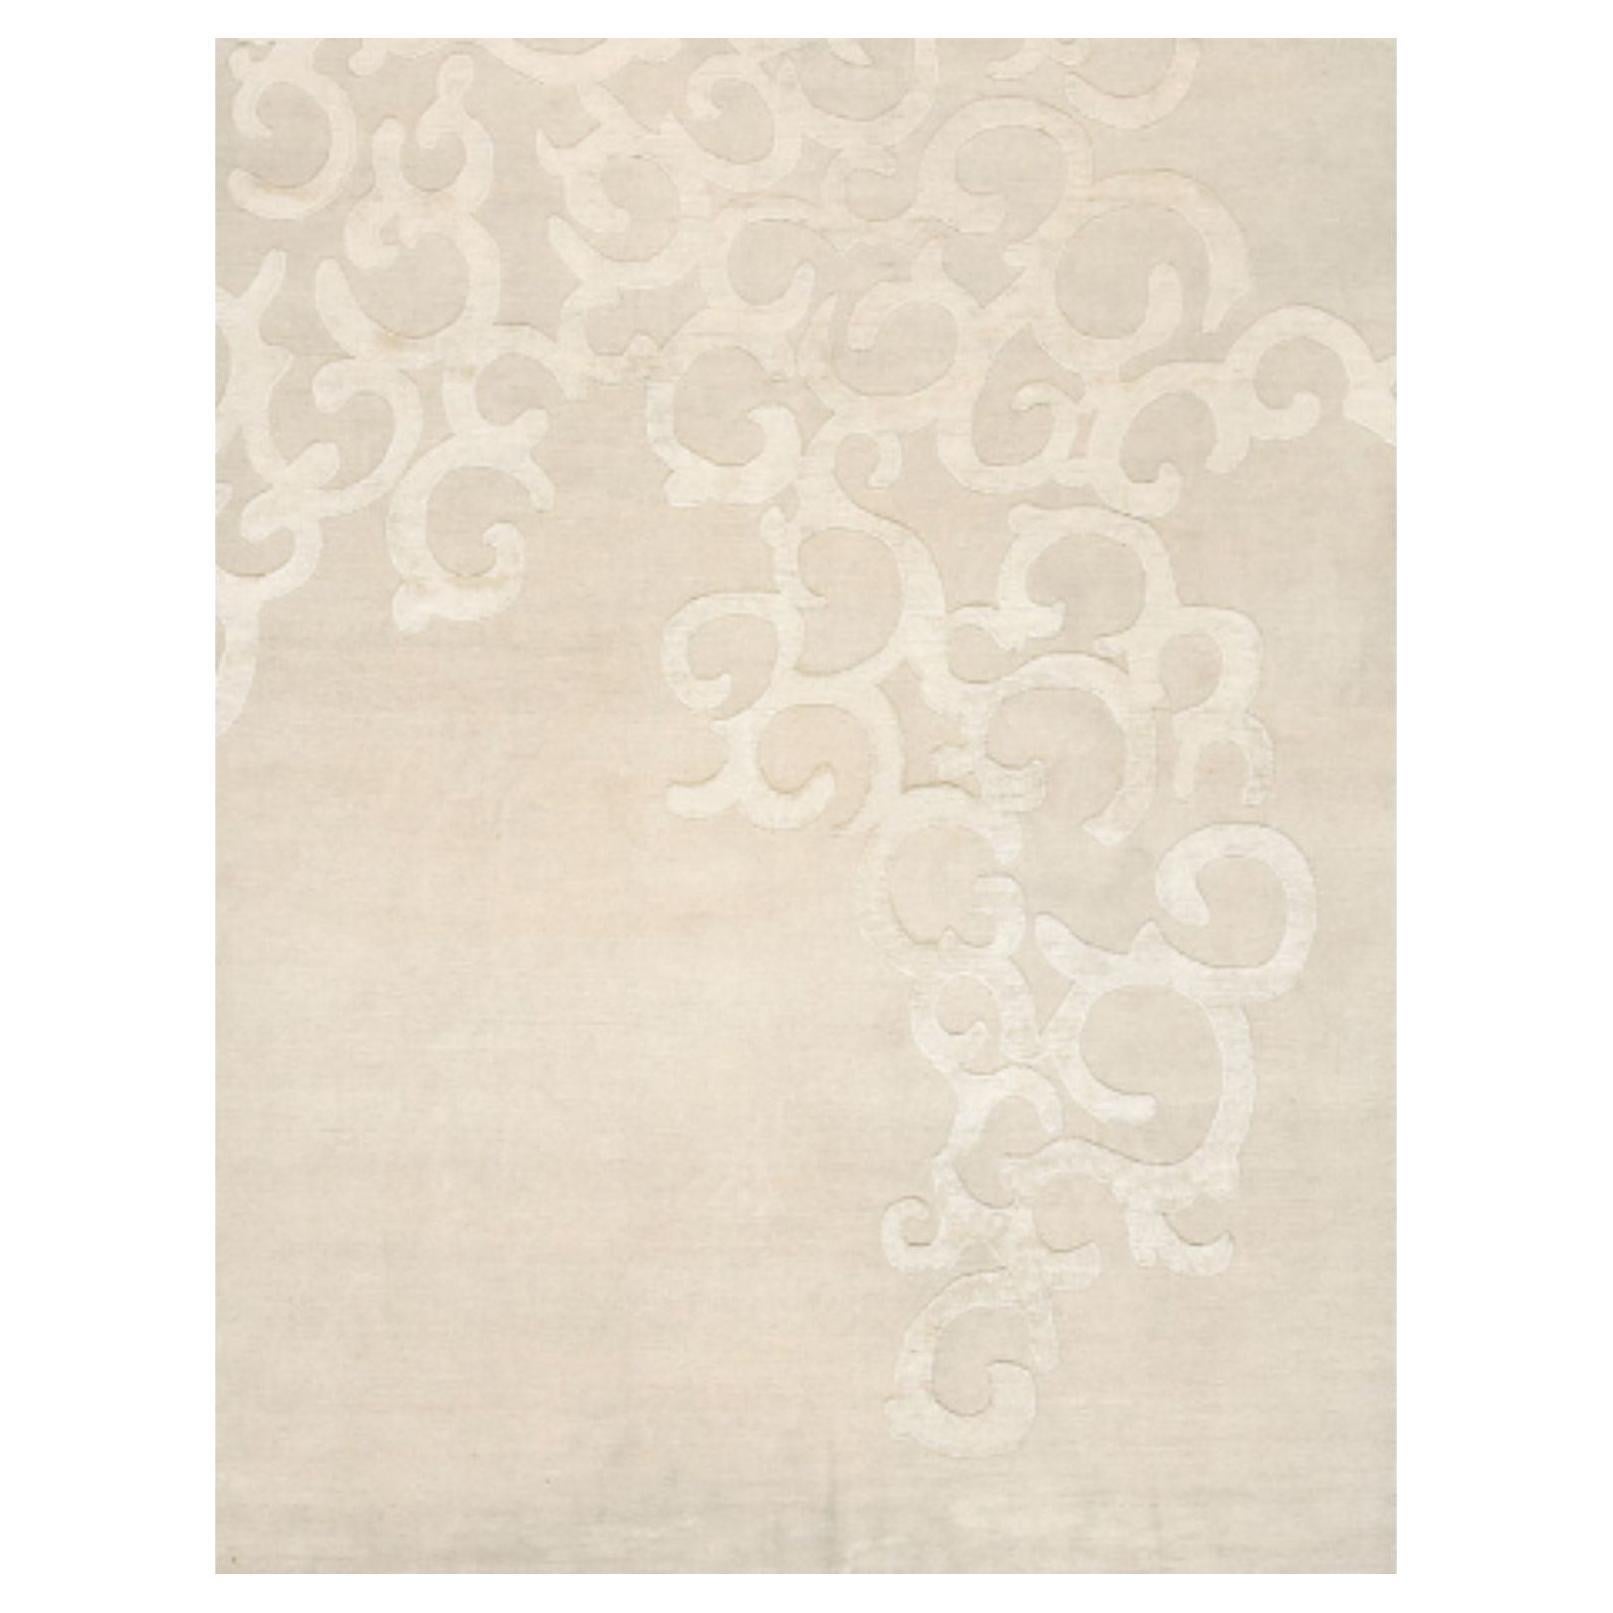 Memento 200 Rug by Illulian For Sale